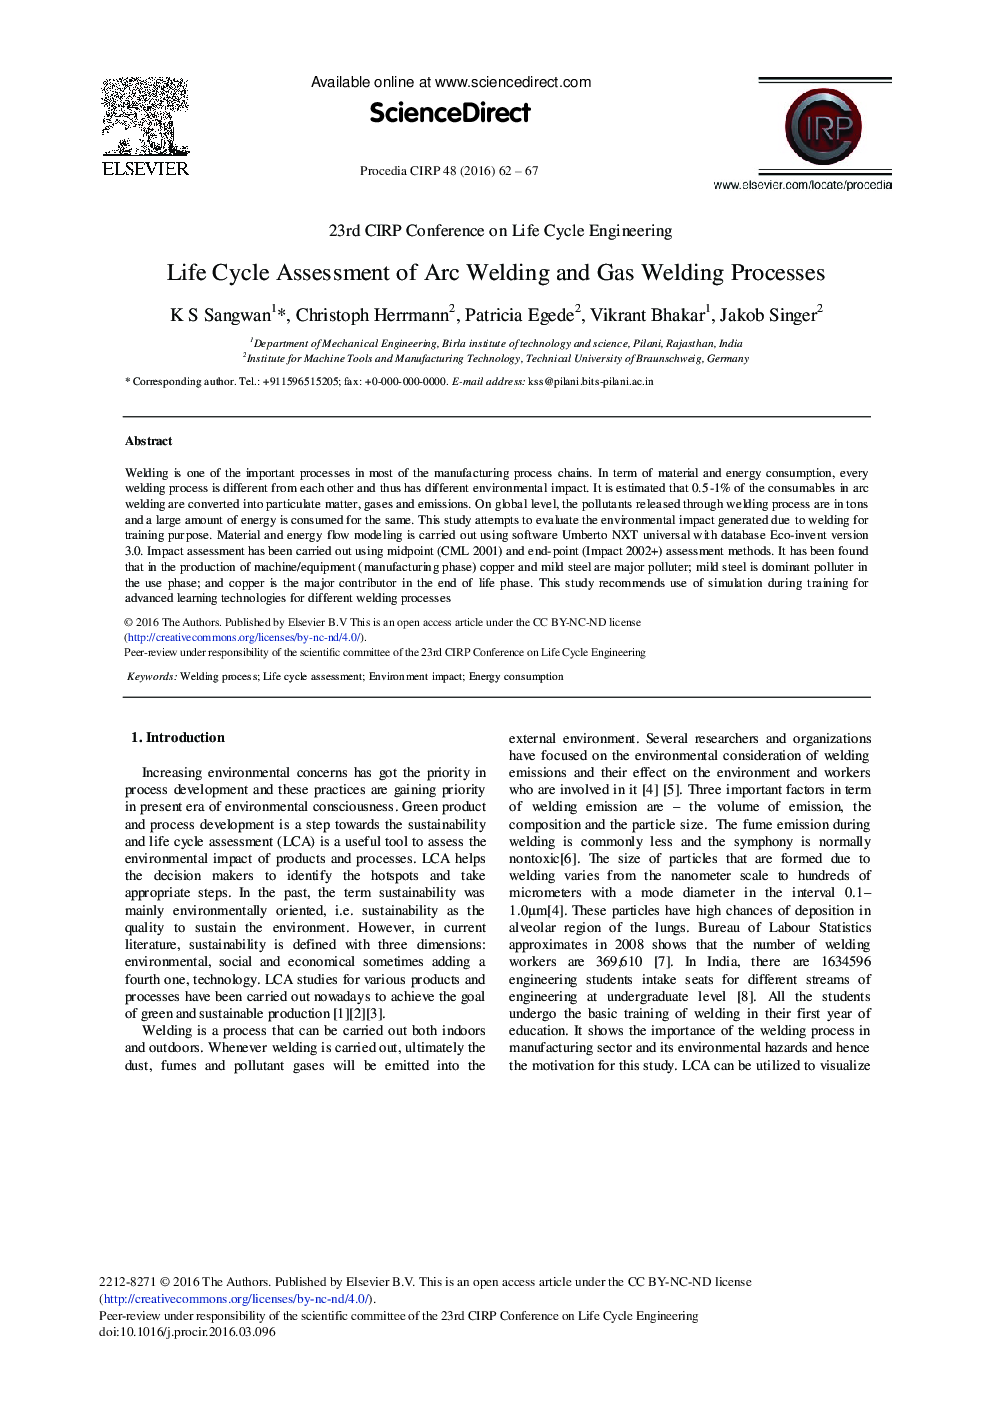 Life Cycle Assessment of Arc Welding and Gas Welding Processes 